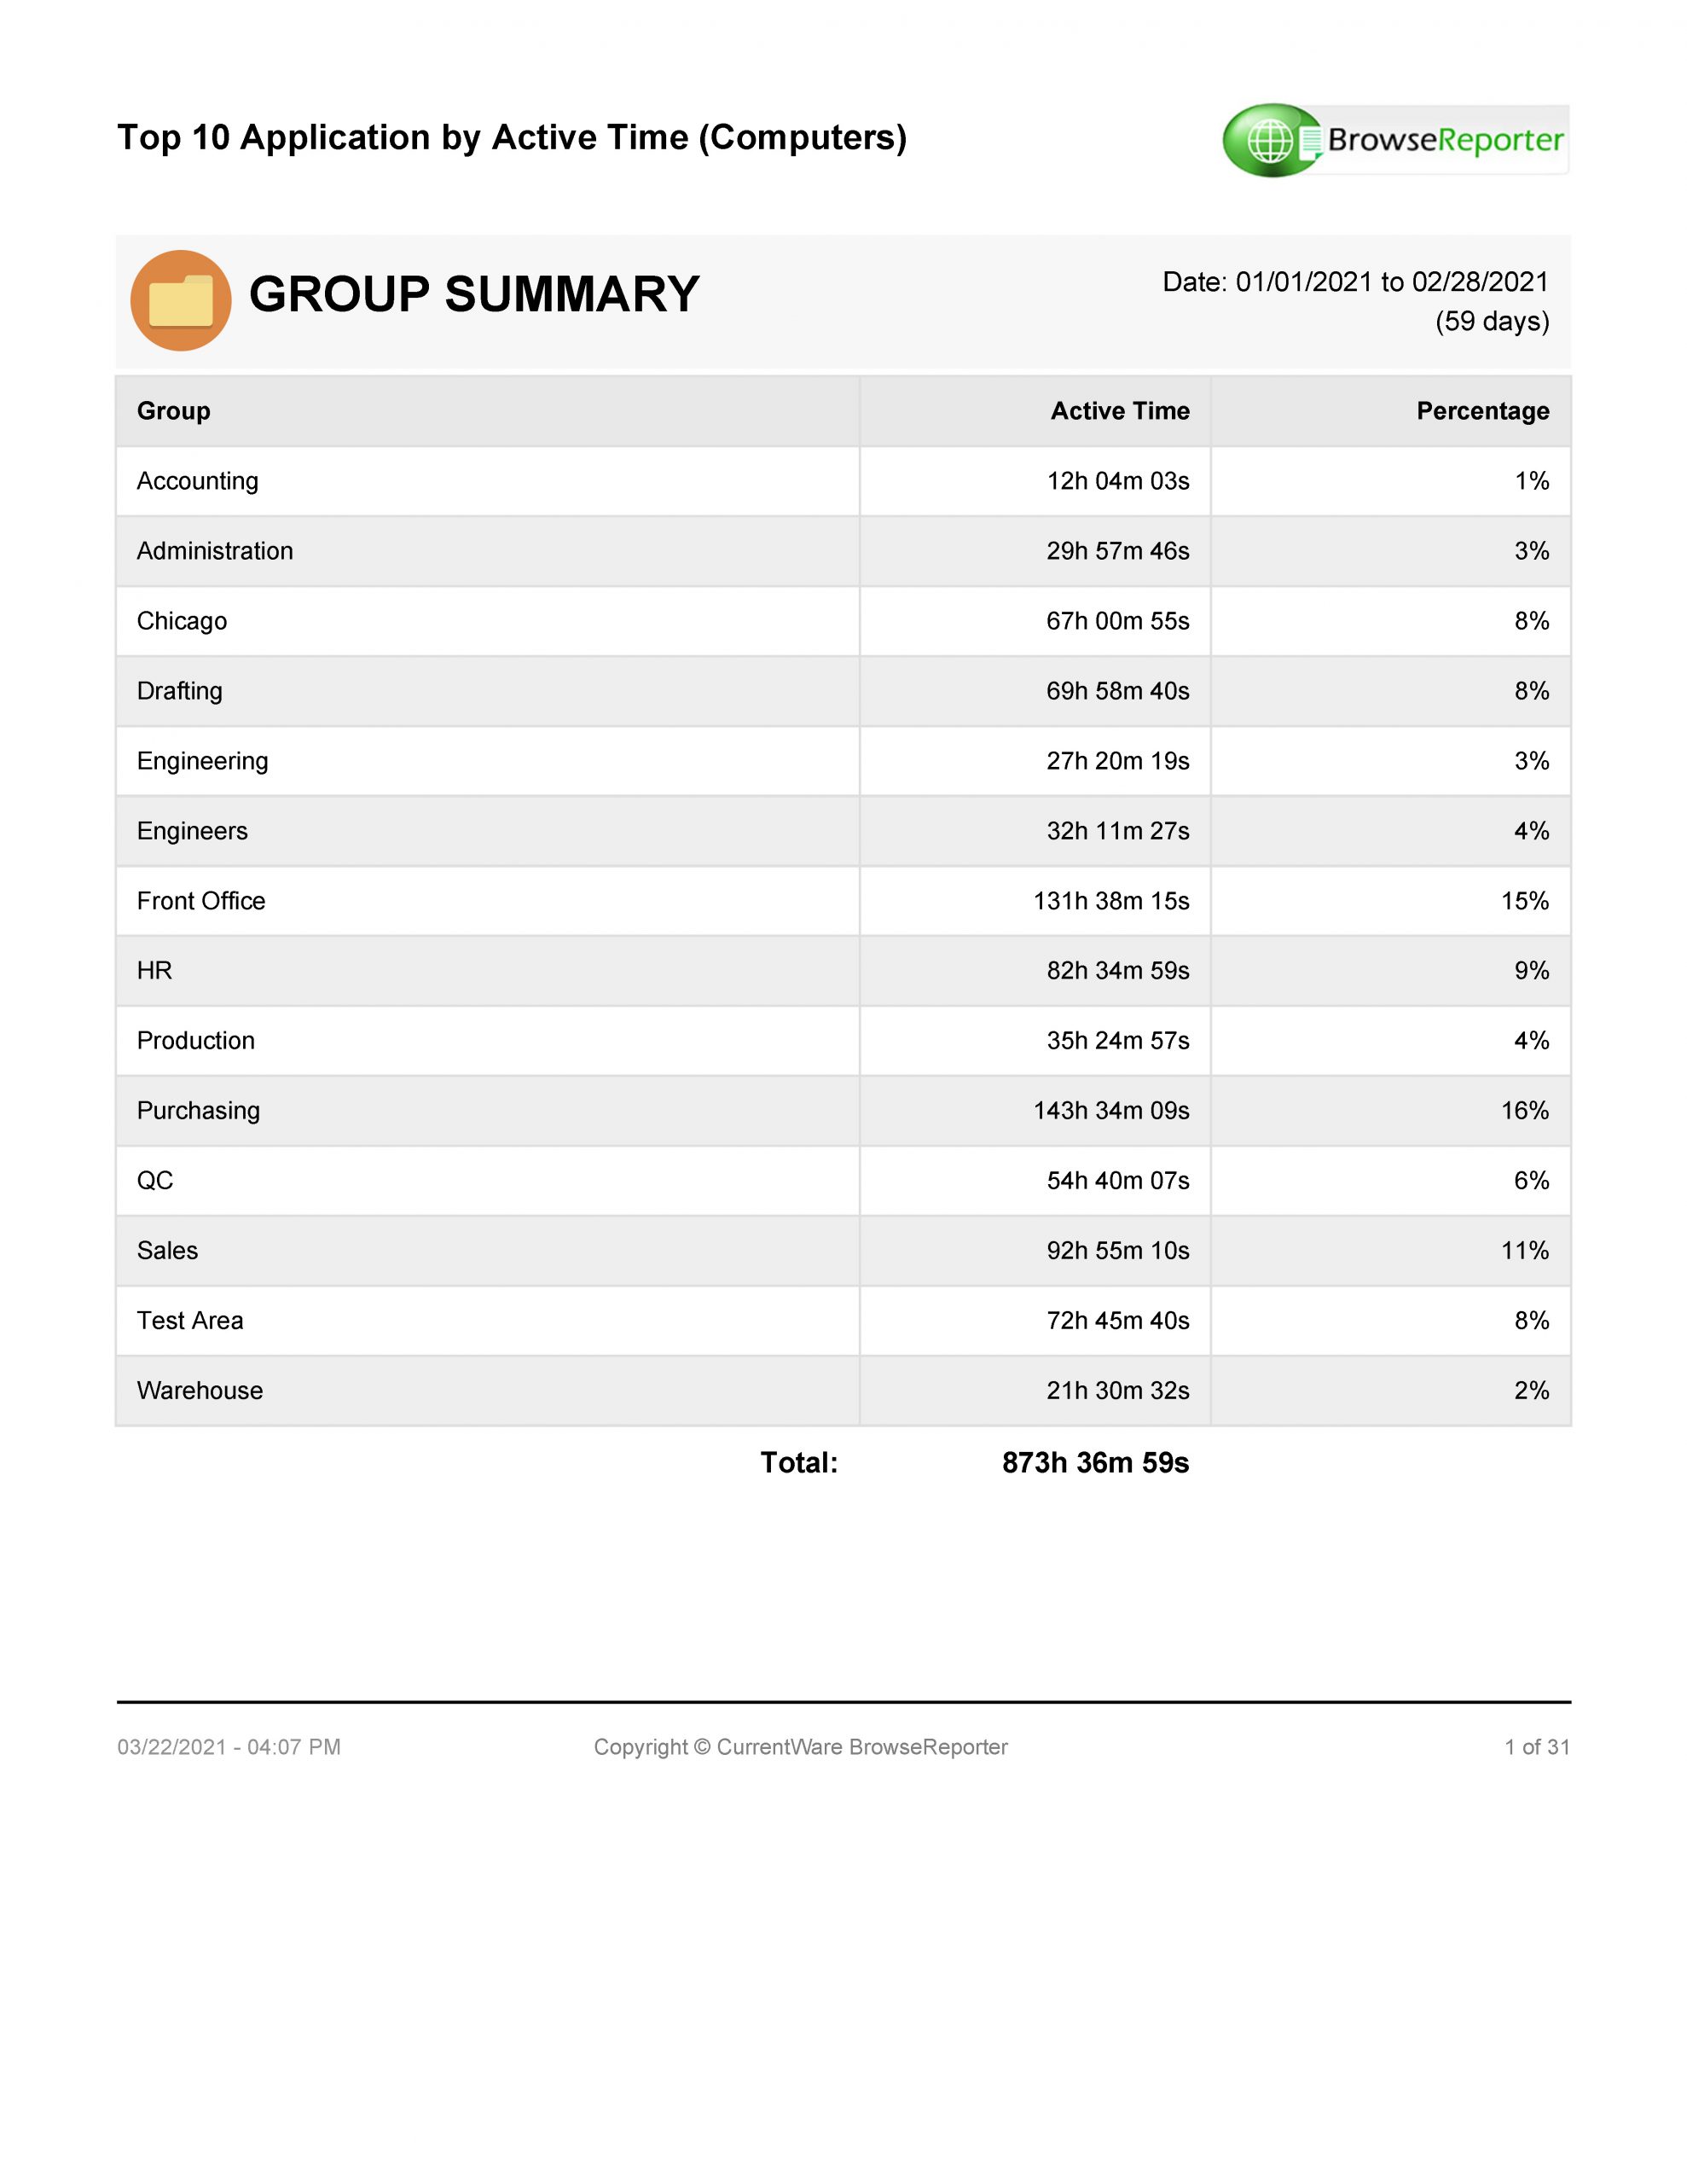 BrowseReporter group summary report for application usage